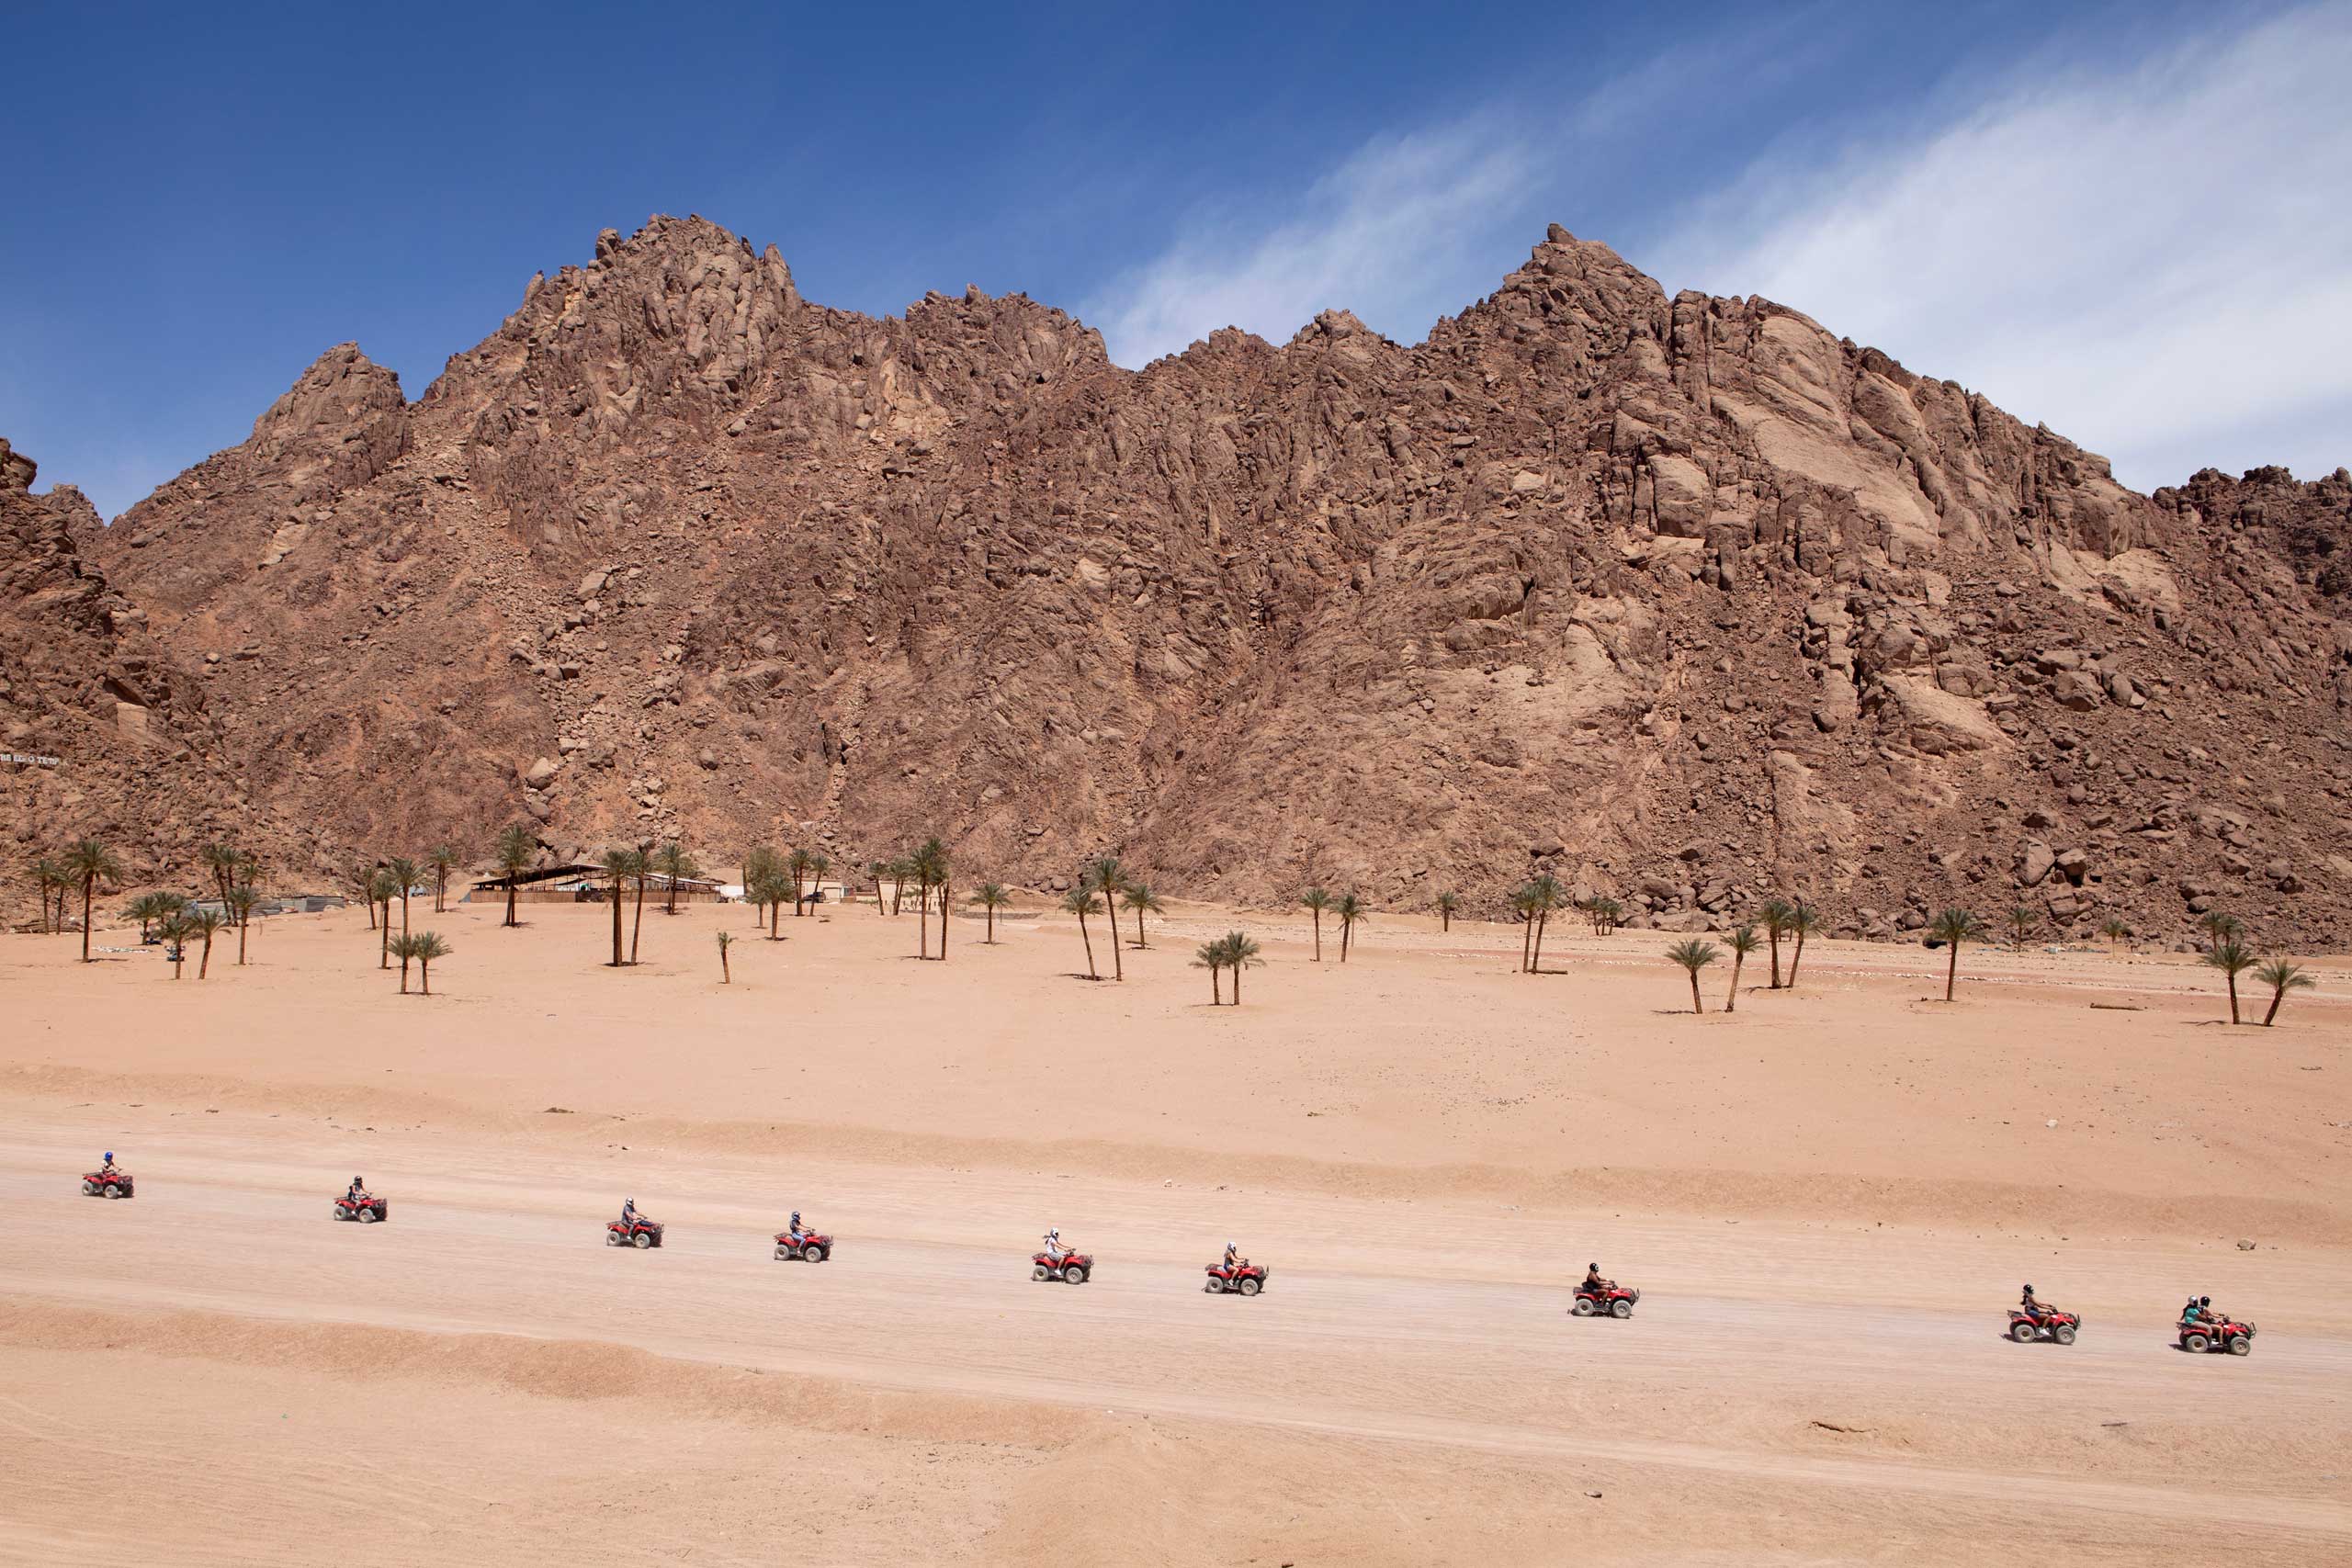 A group on quad bikes on an expedition in the desert, in Sharm el Sheikh, Sinai,  March 2015.